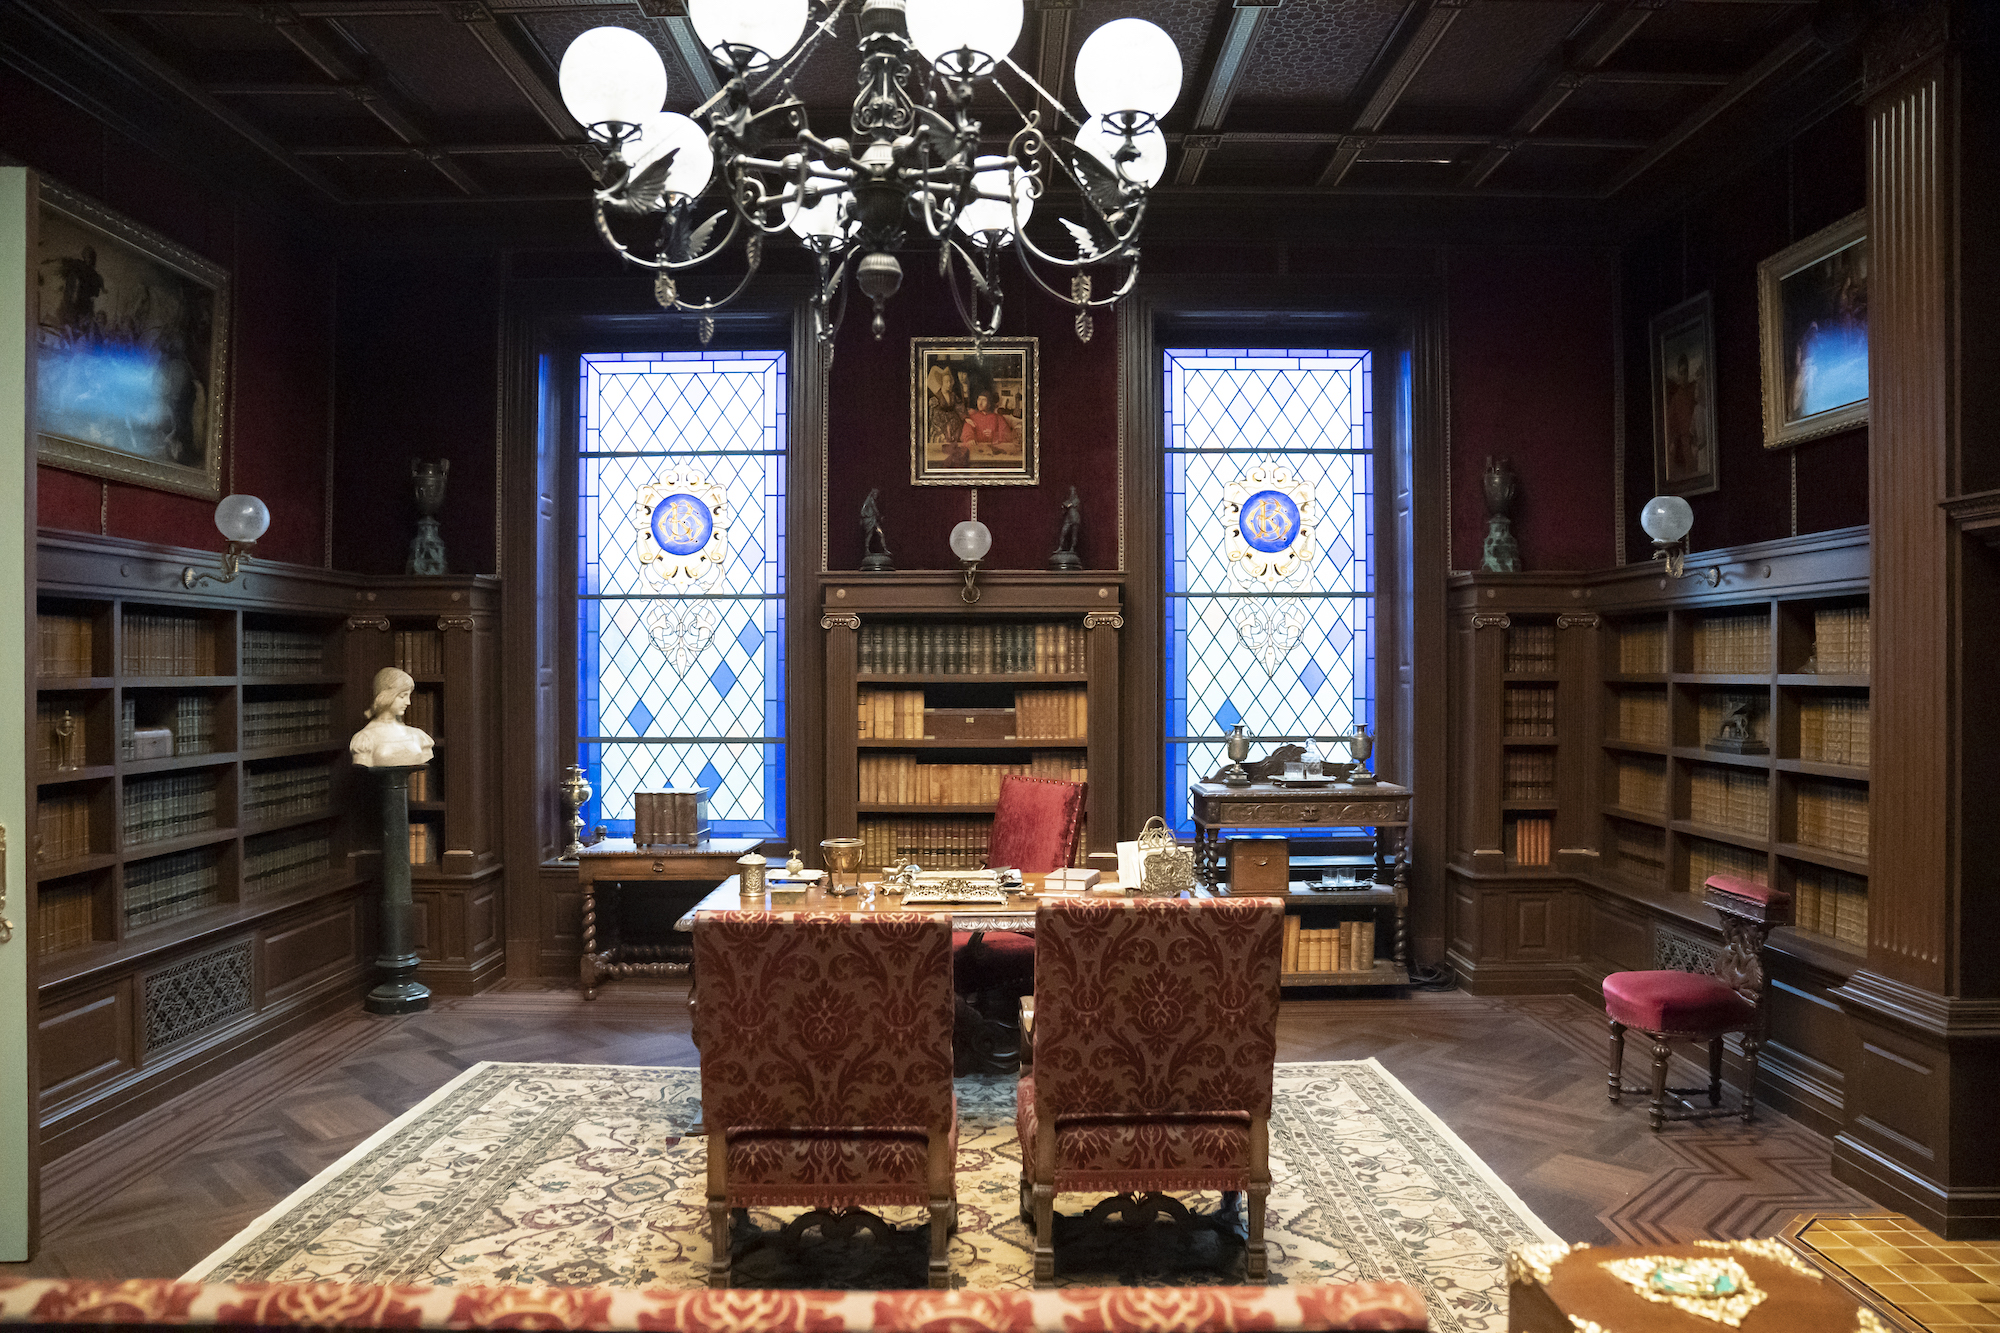 George Russell's office in HBO's The Gilded Age, built on a soundstage in Glendale, New York - Effect Magazine